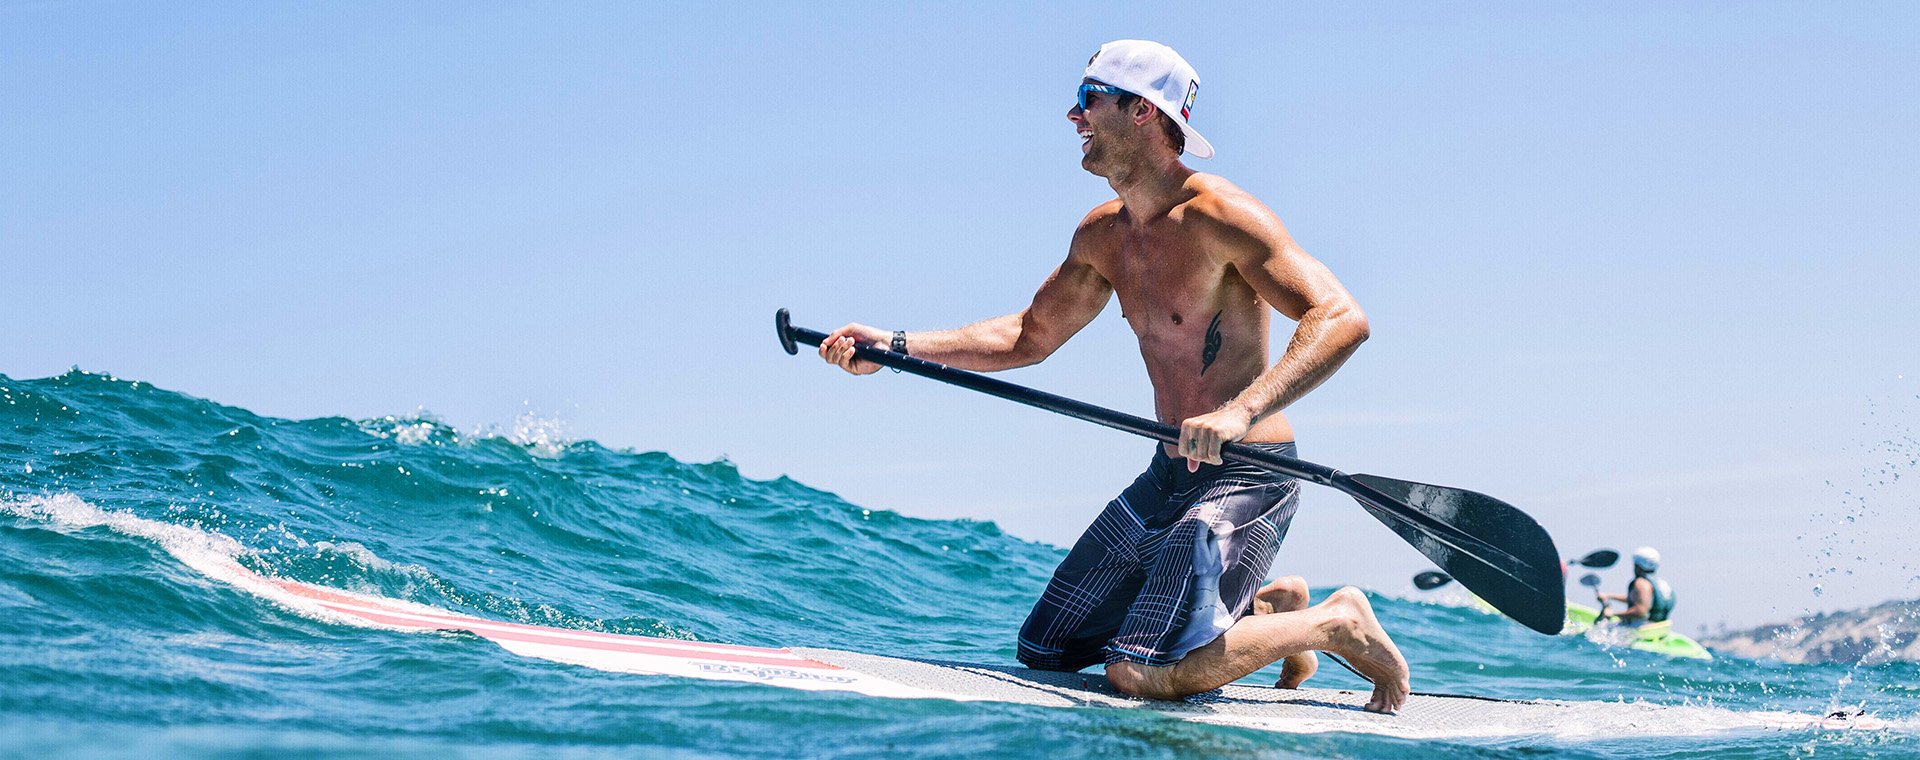 Lessons - SUP Lessons with Everyday California in La Jolla, California.